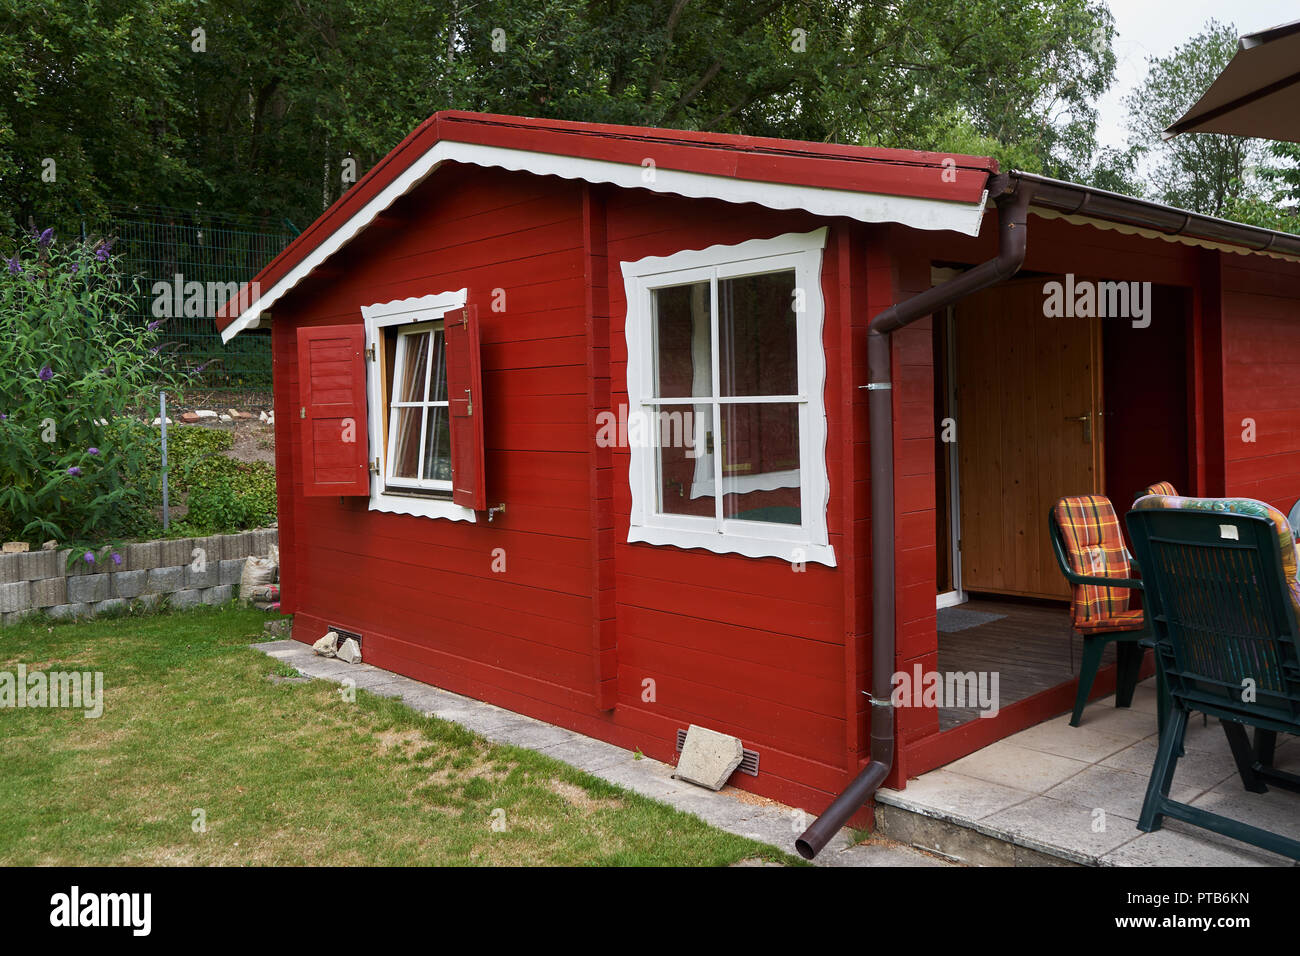 Small red painted garden house with patio and chairs and decorative white trim around the roof and windows. Stock Photo